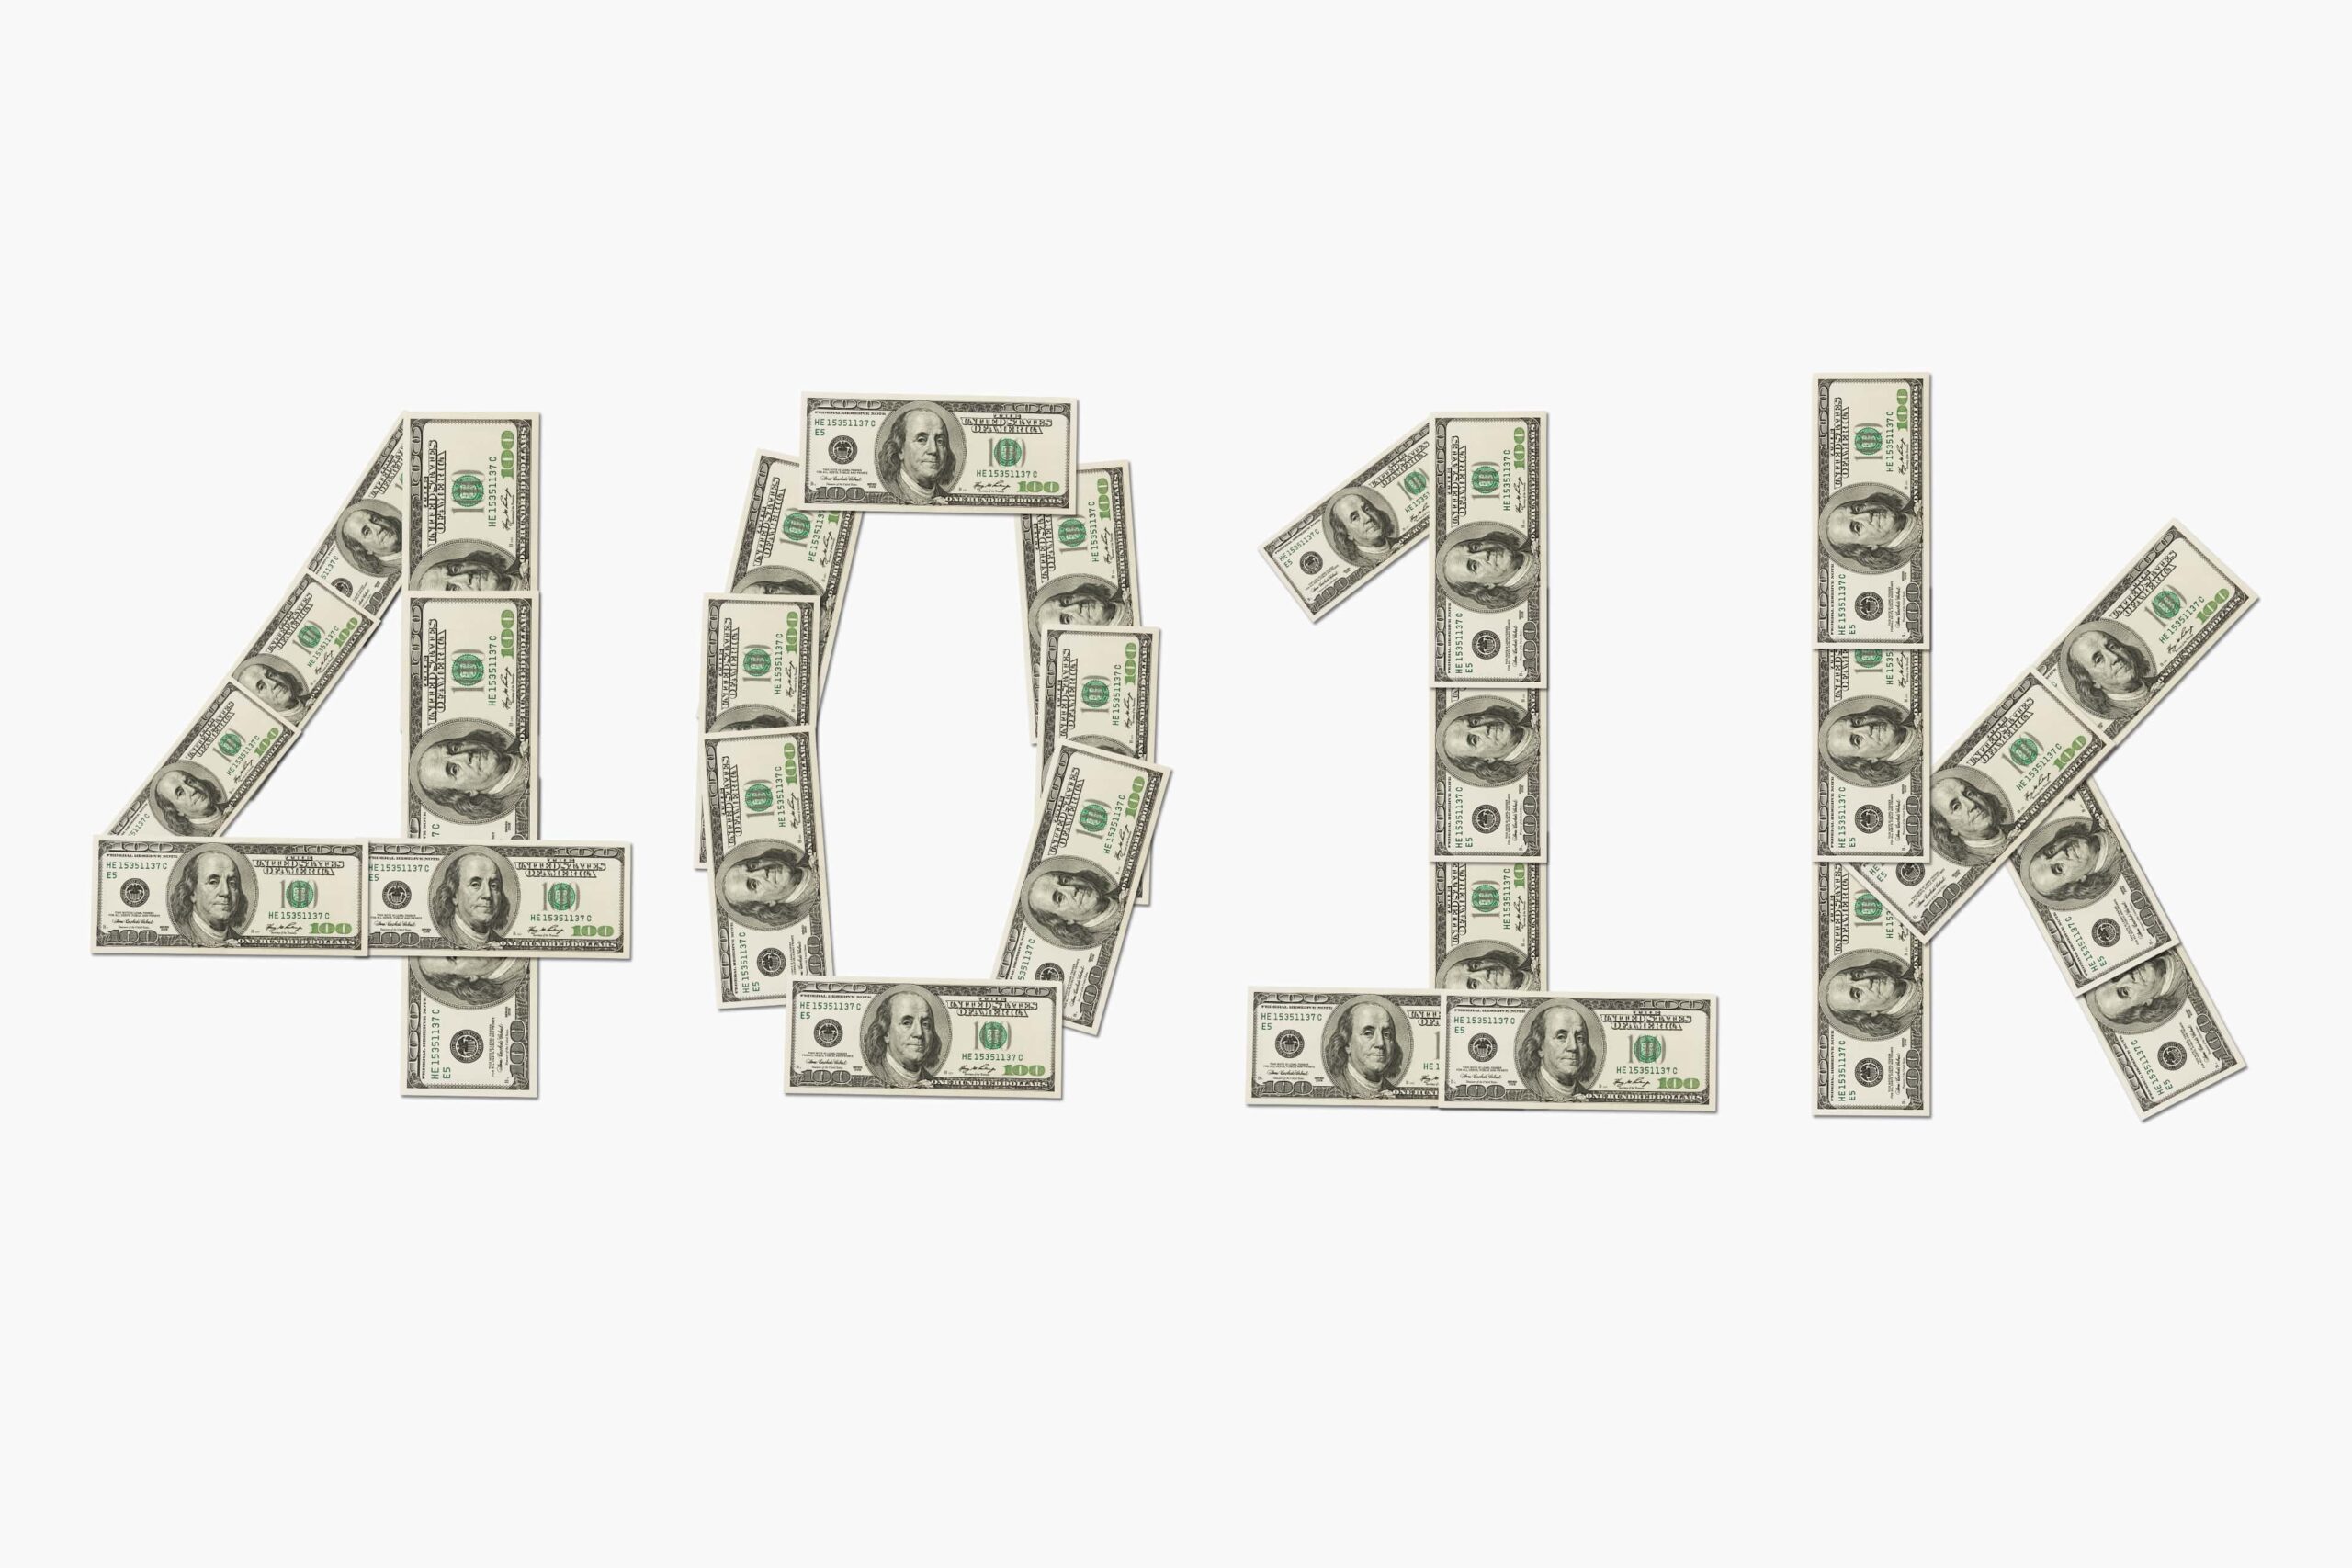 401k spelled out with hundred dollar bills